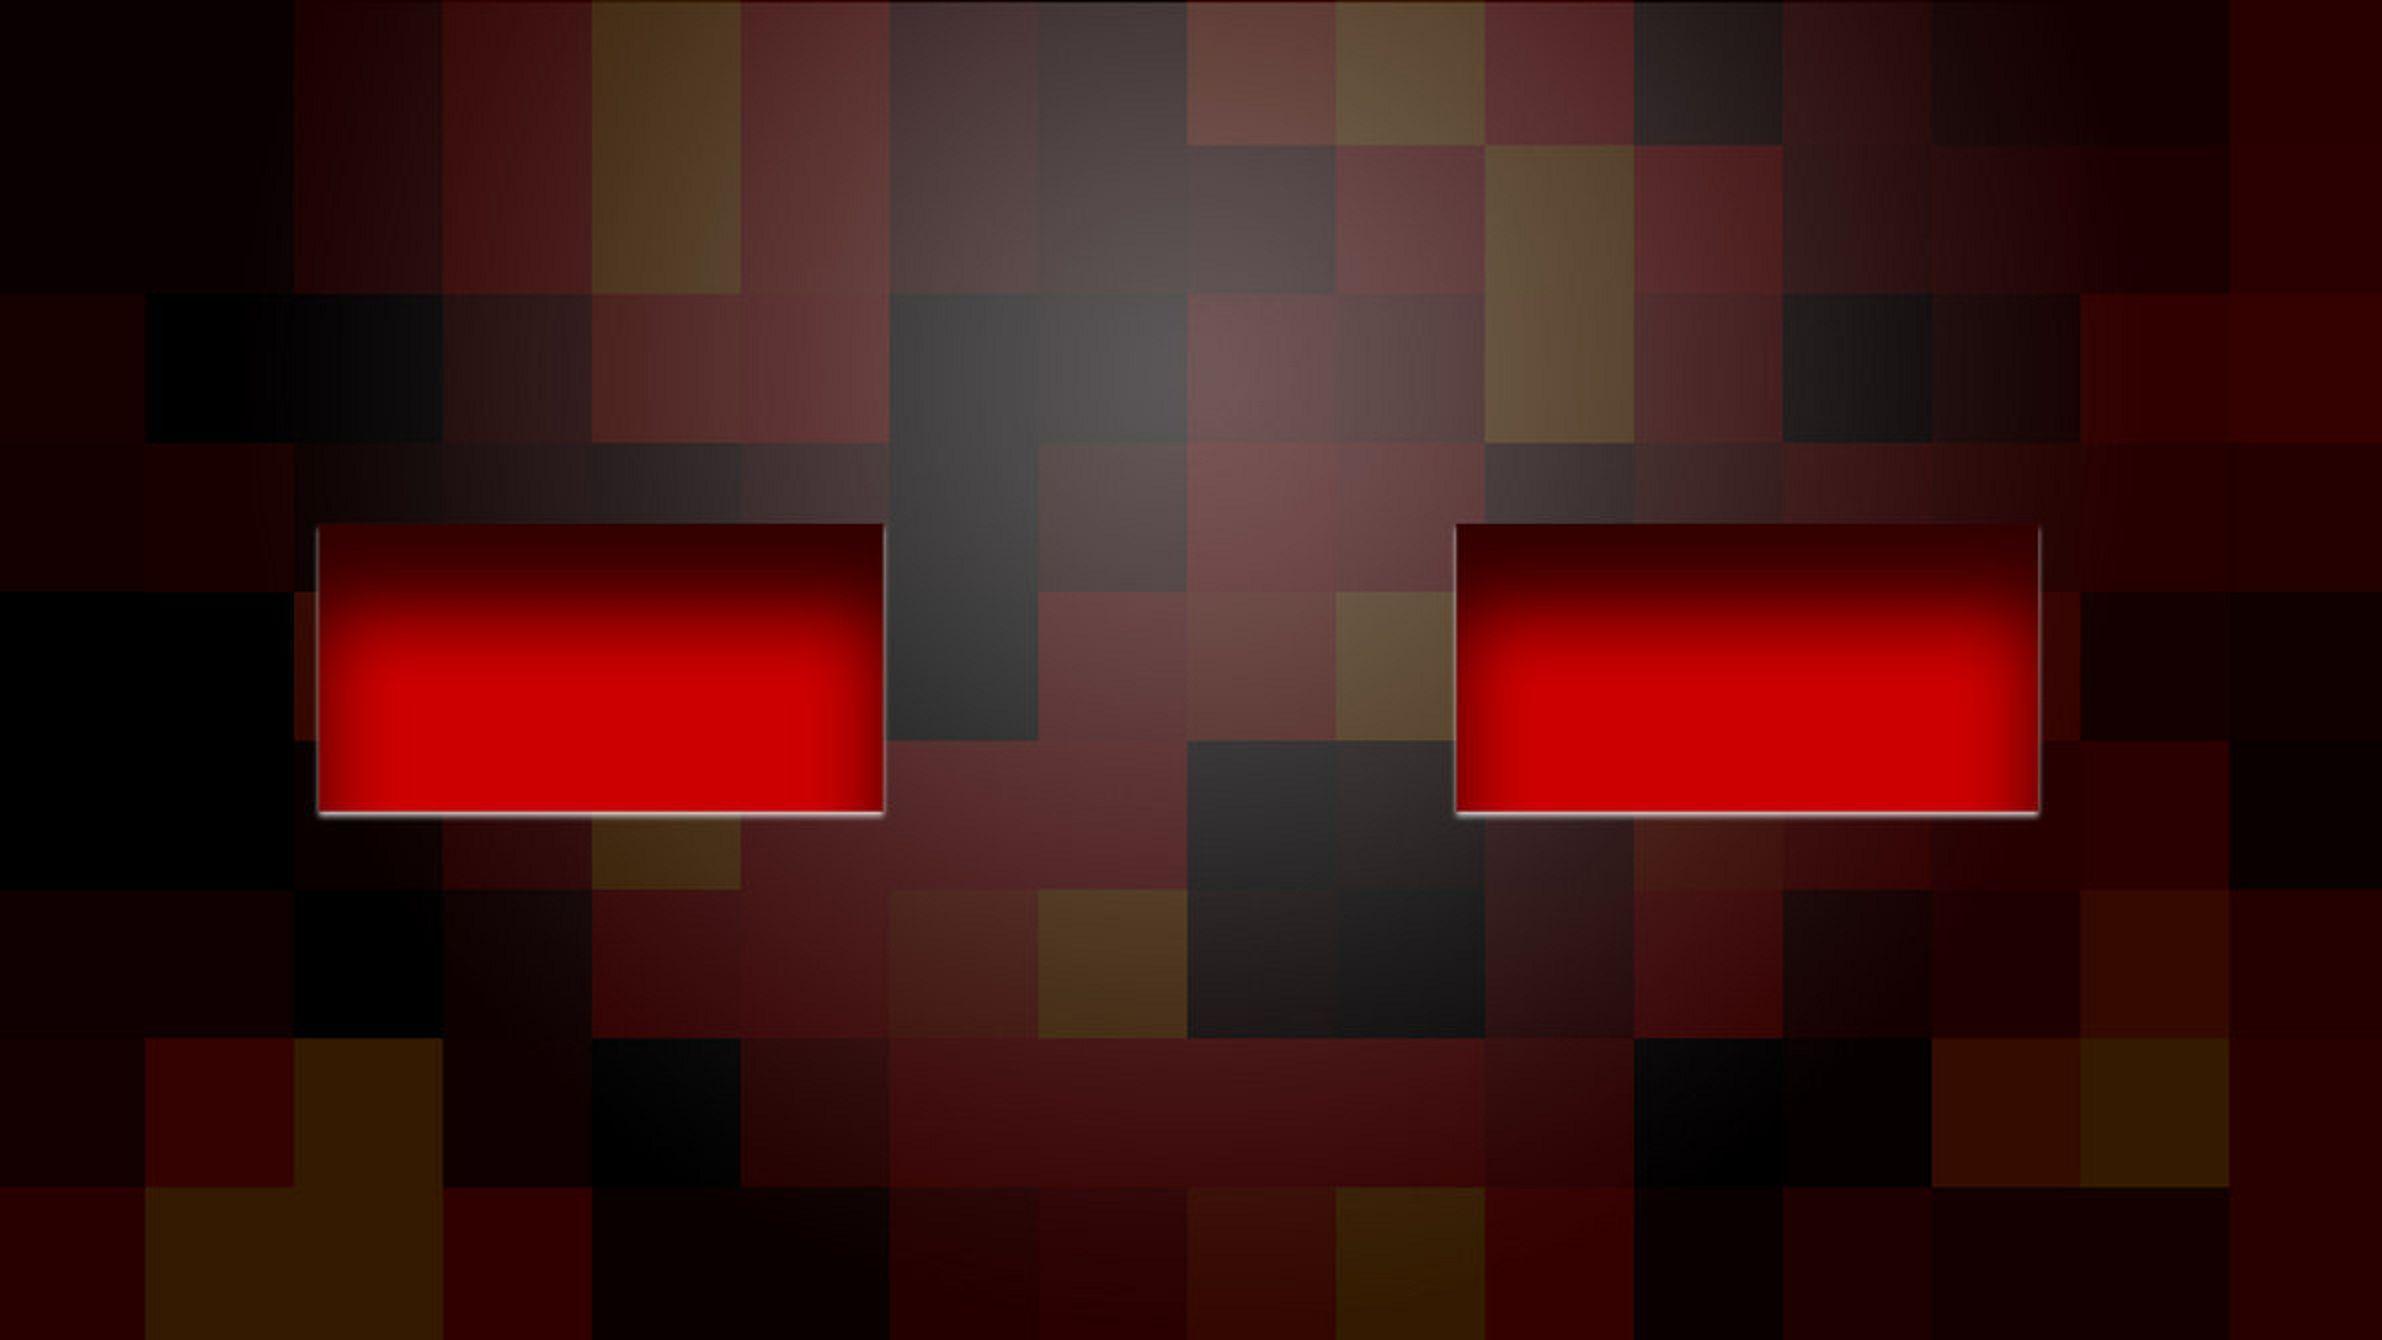 Red Minecraft Wallpapers Wallpaper Cave